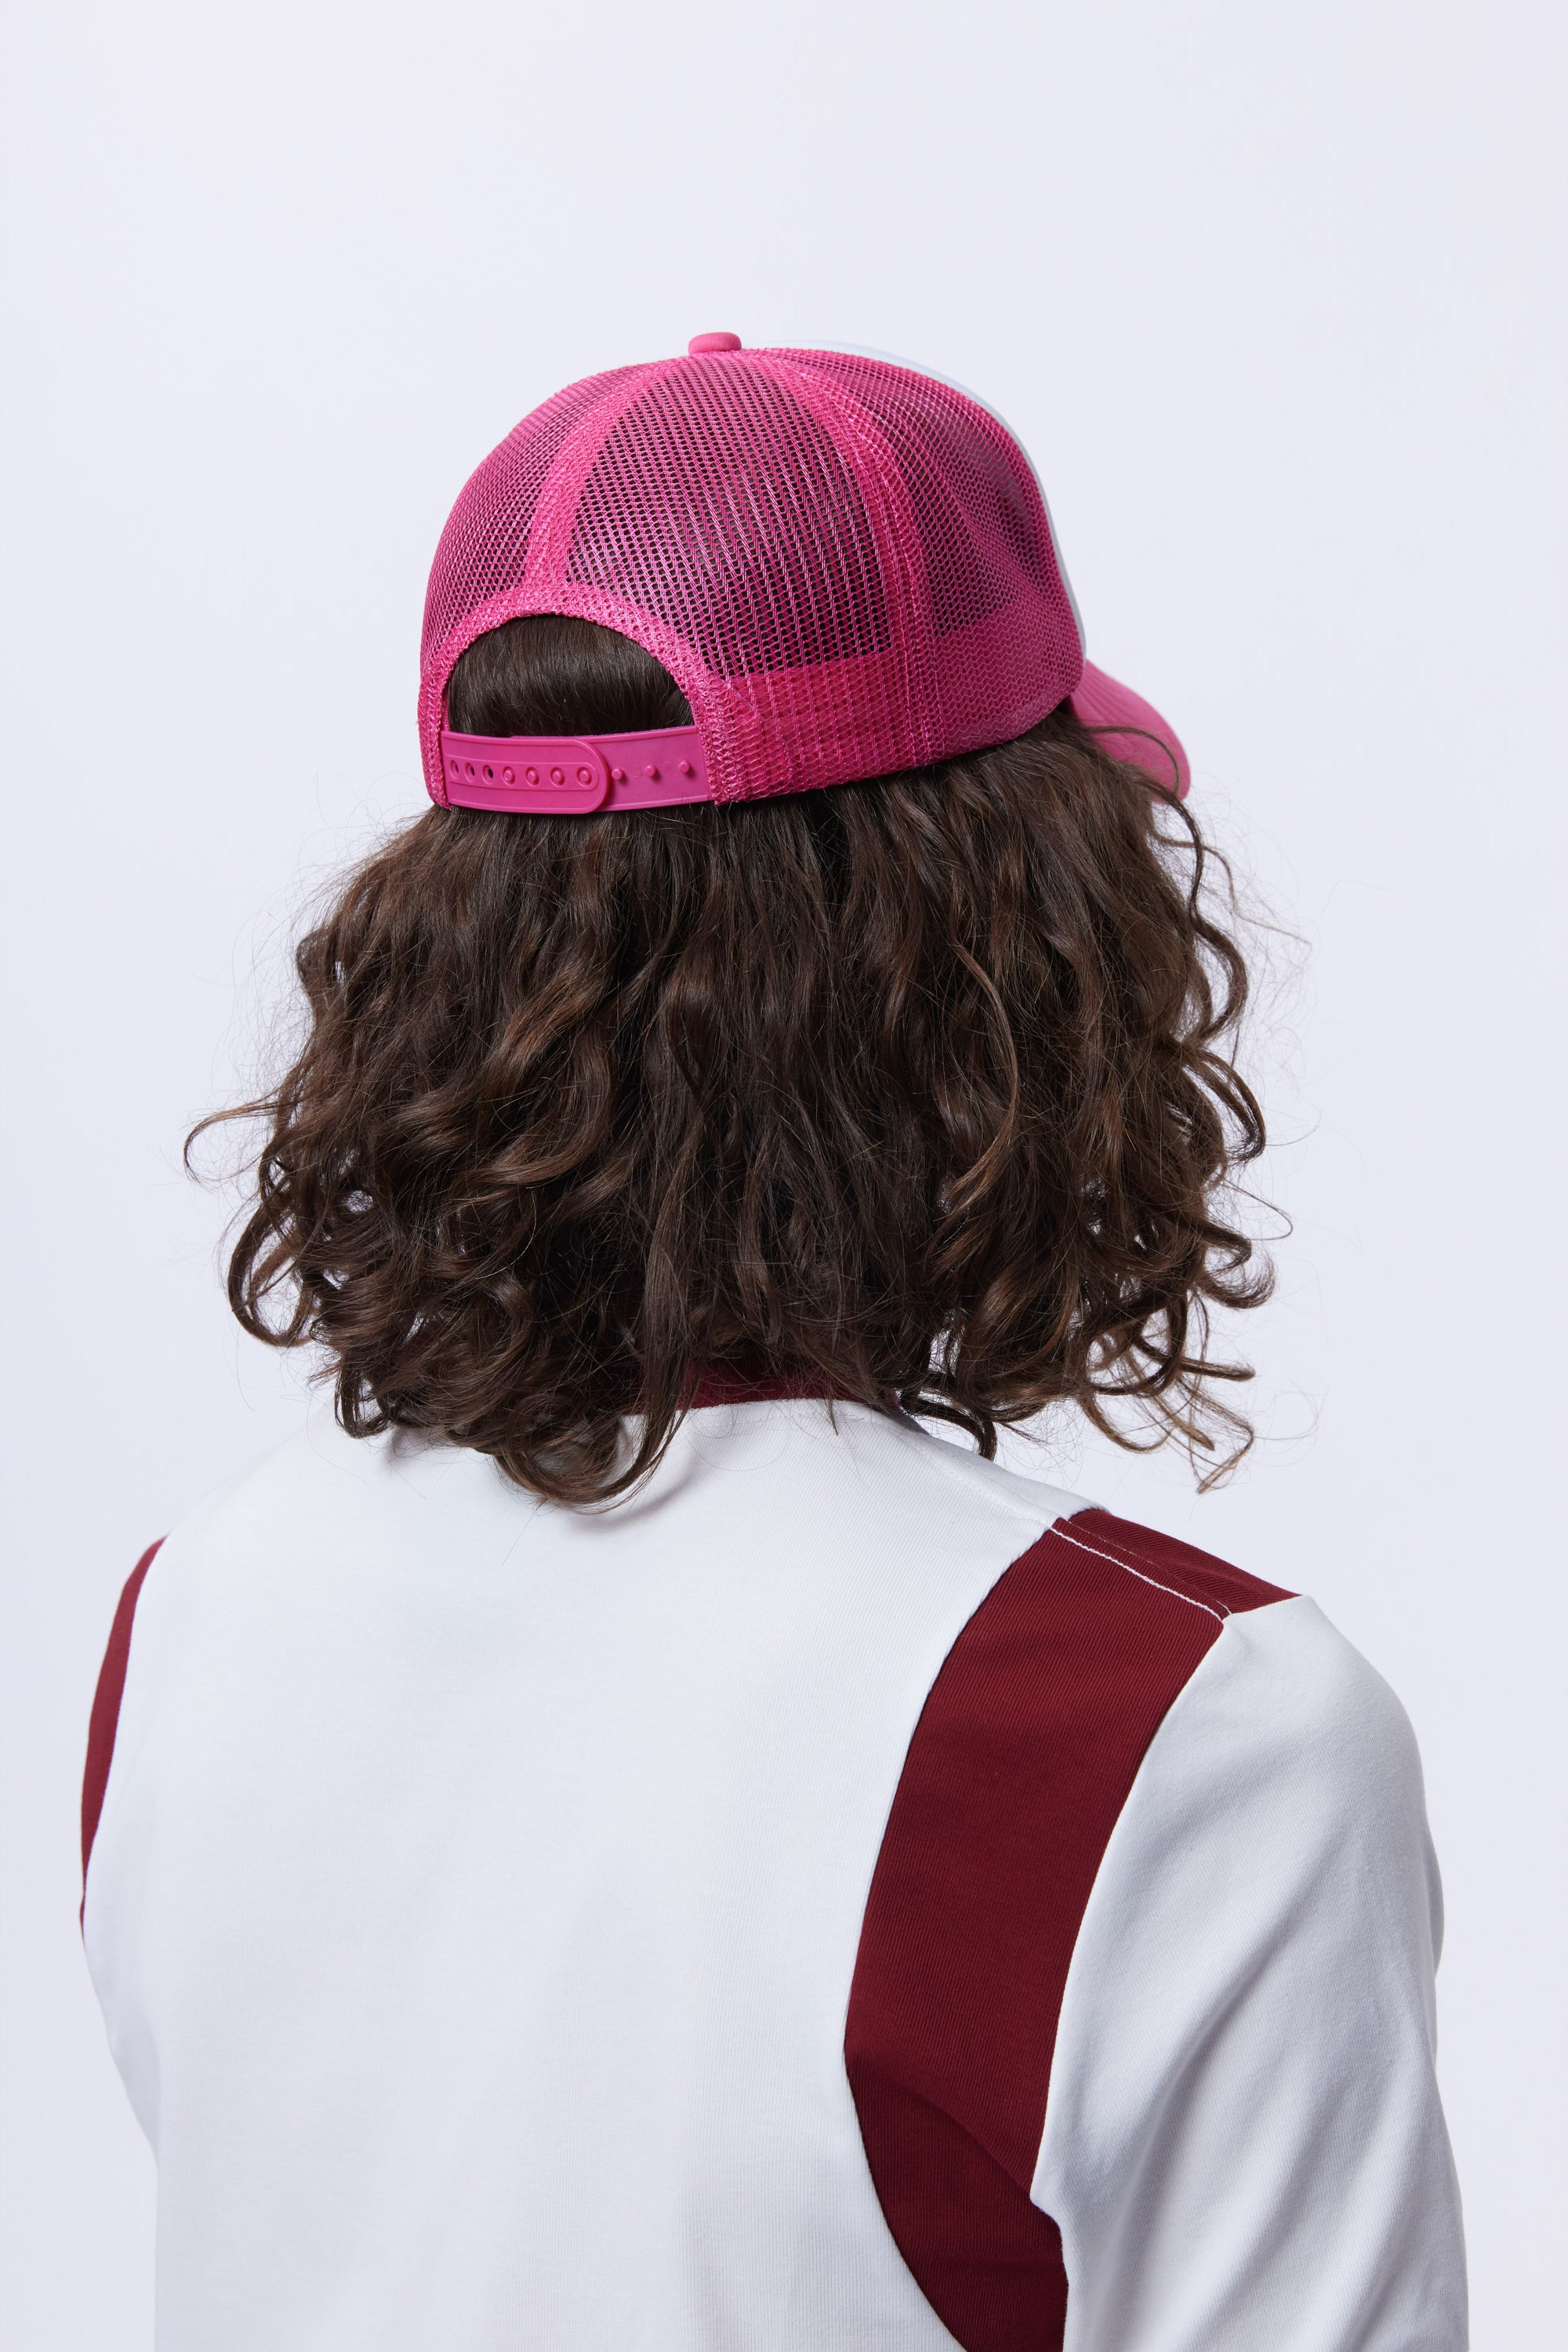 The LOVE ON THE LINE TRUCKER CAP  available online with global shipping, and in PAM Stores Melbourne and Sydney.